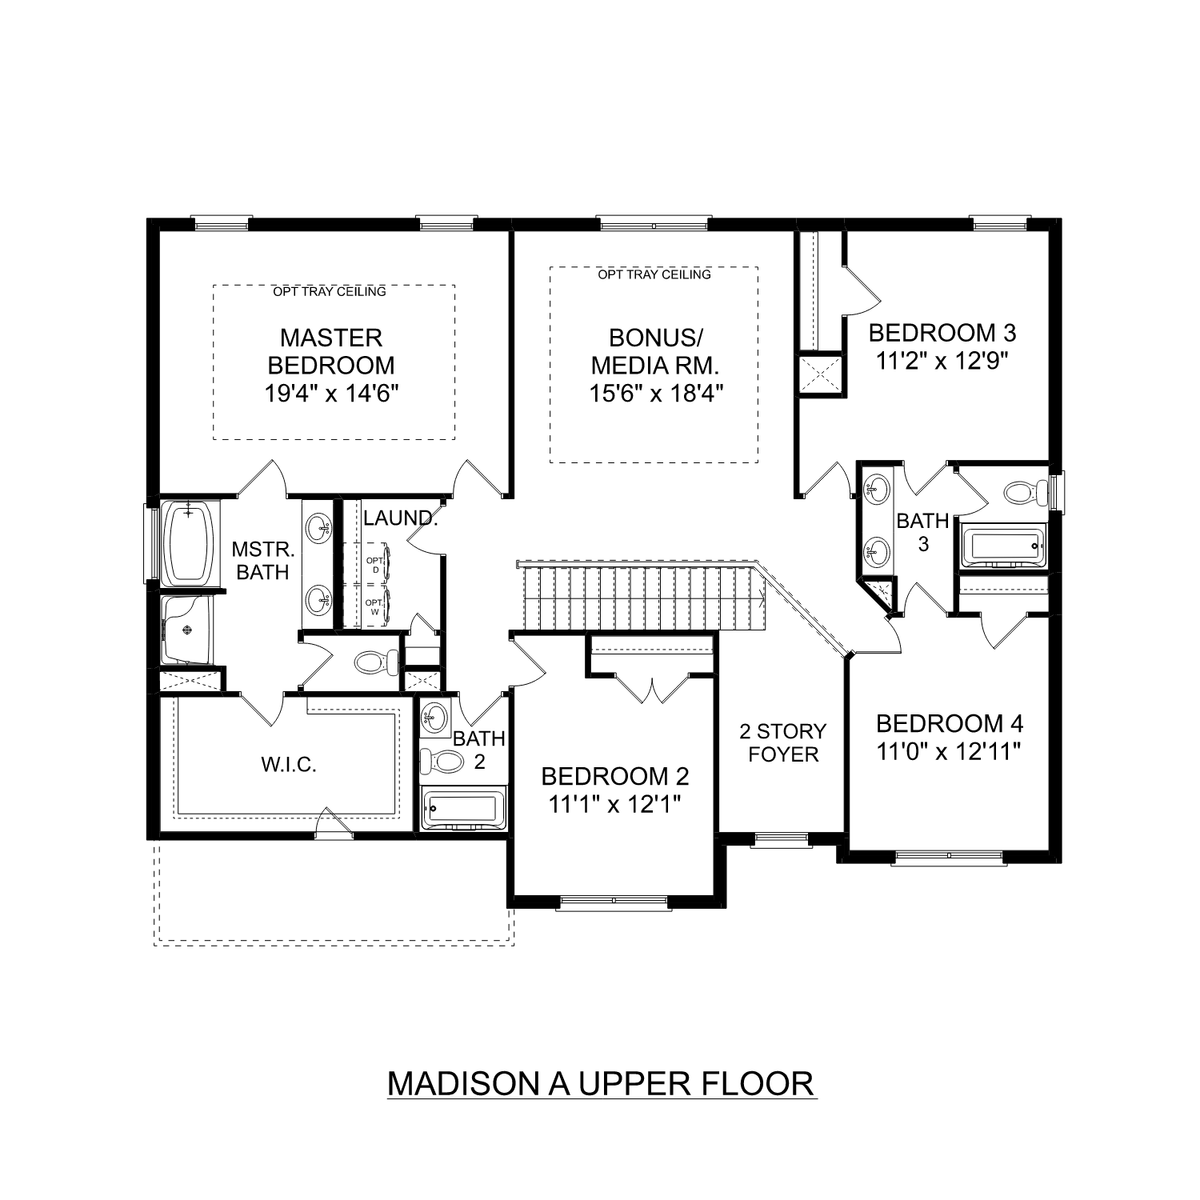 2 - The Madison A buildable floor plan layout in Davidson Homes' Creekside community.